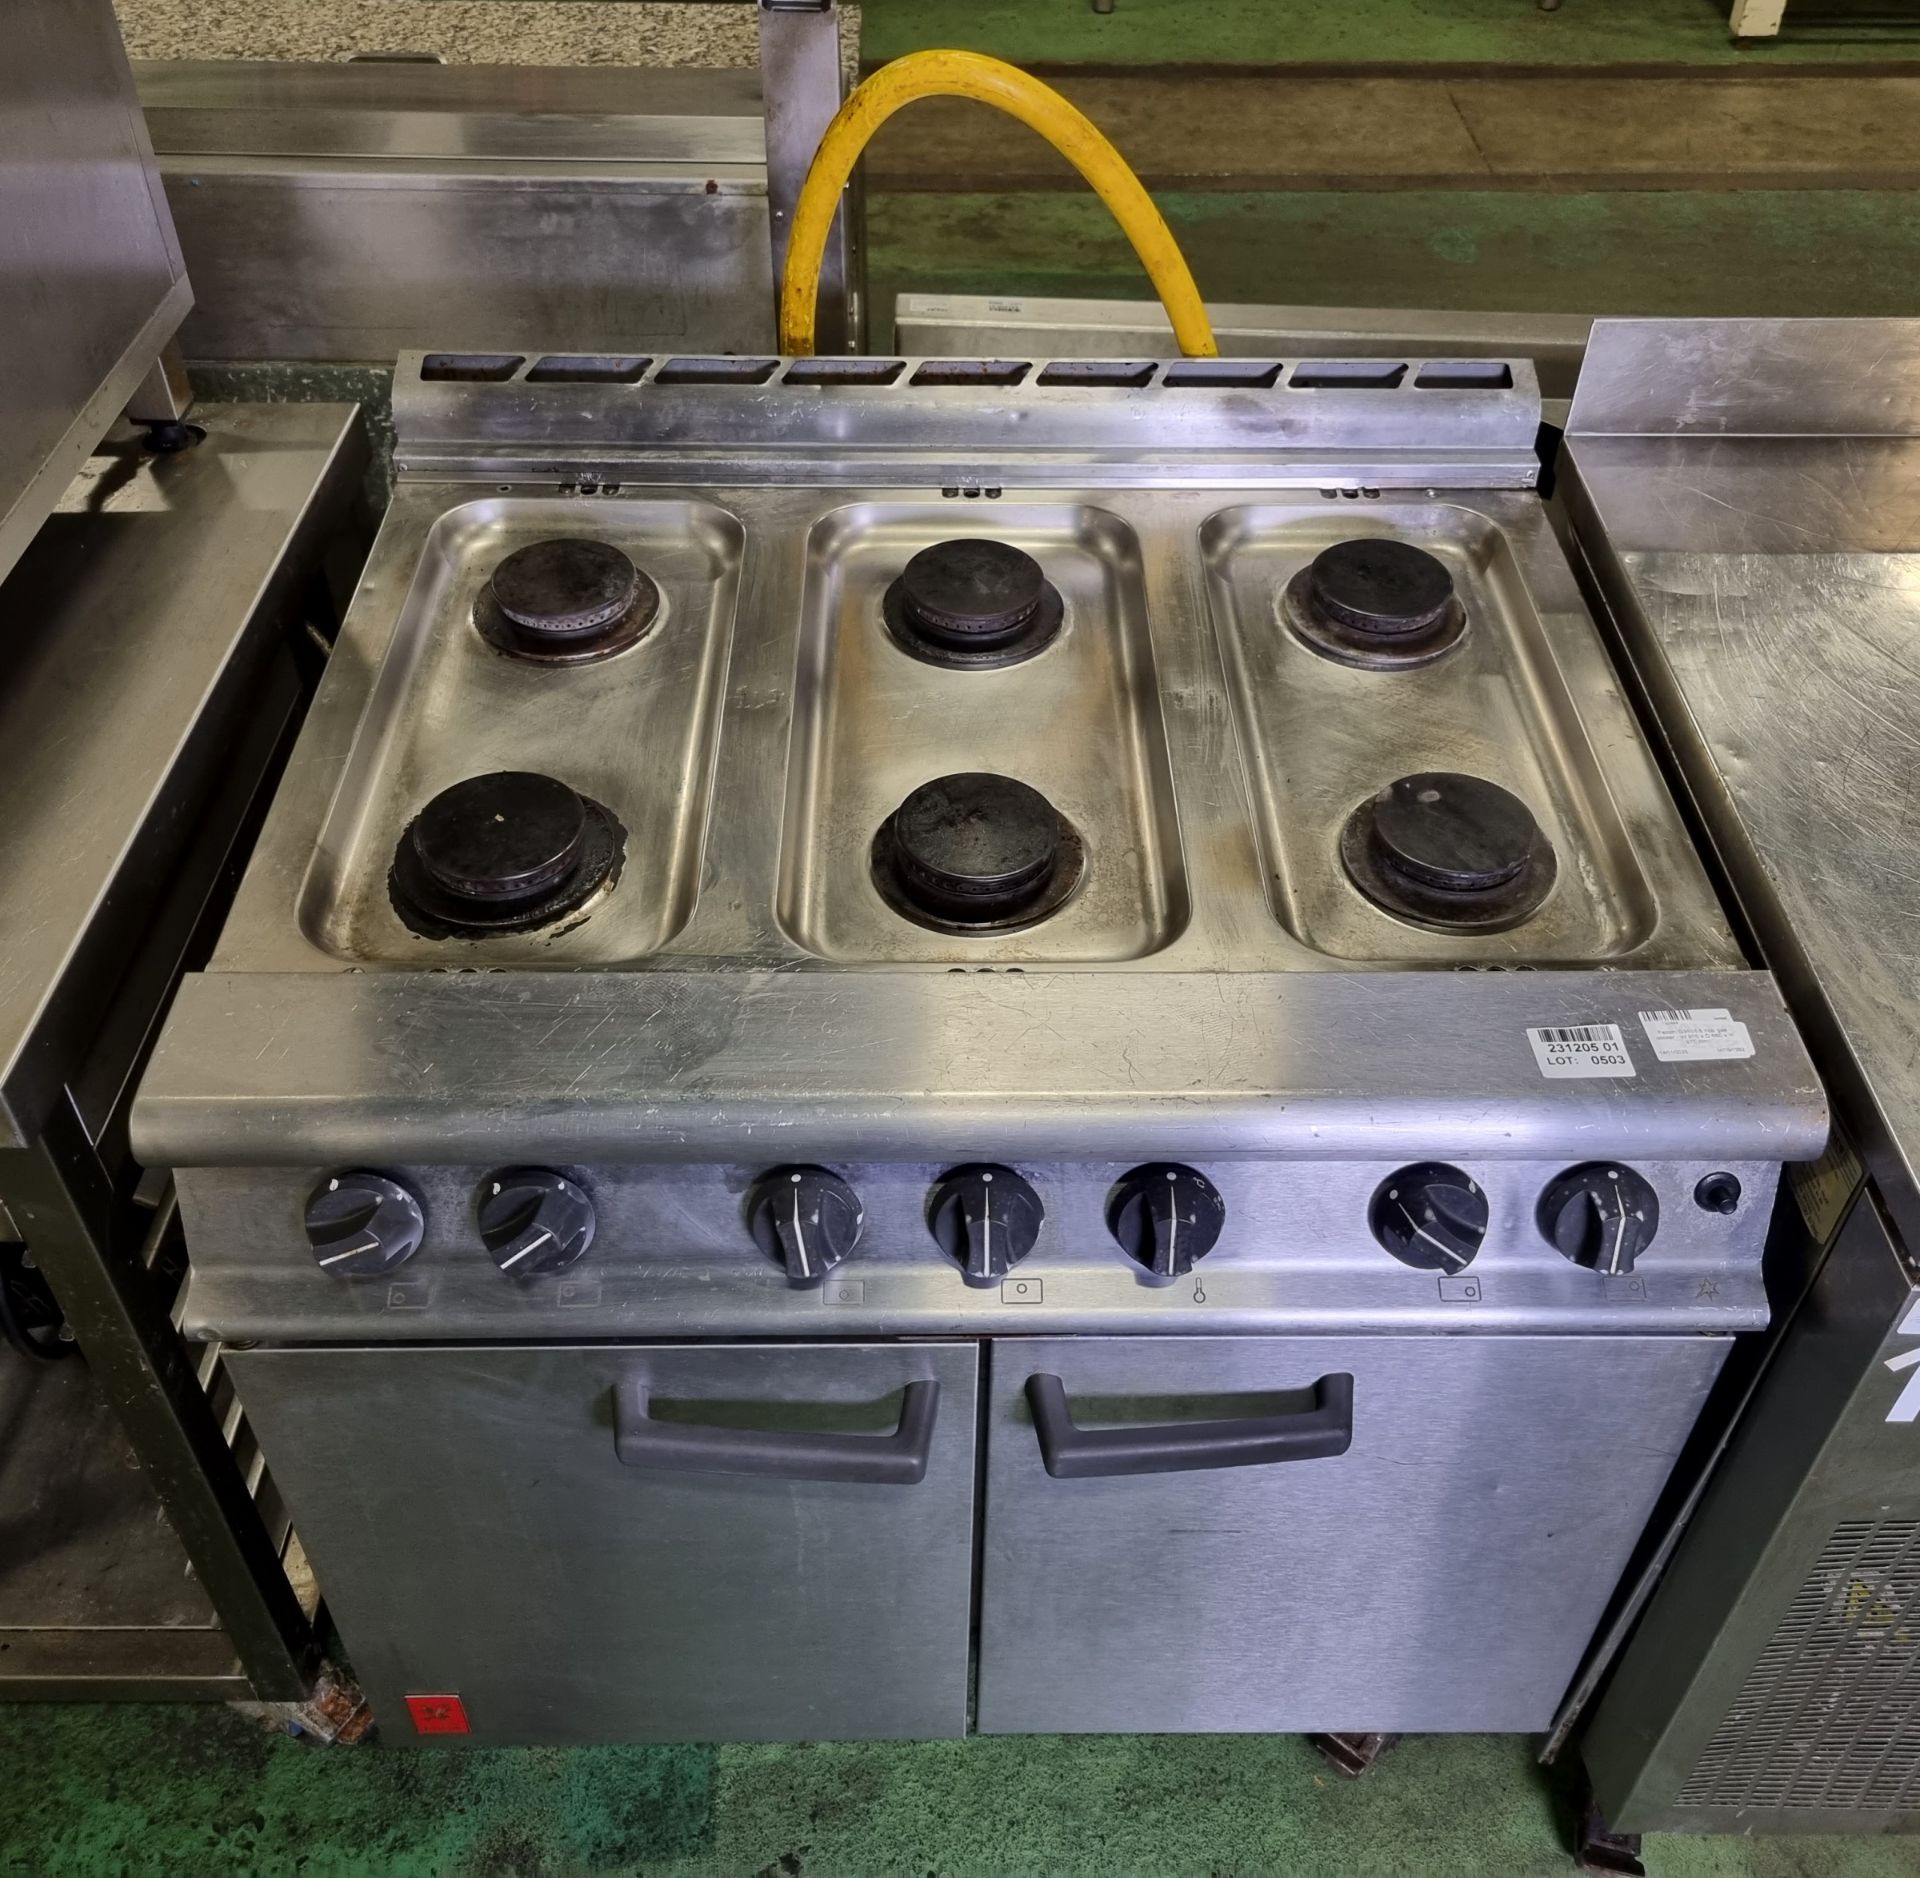 Falcon G3101 6 hob gas cooker - W 910 x D 860 x H 970 mm - Image 2 of 5